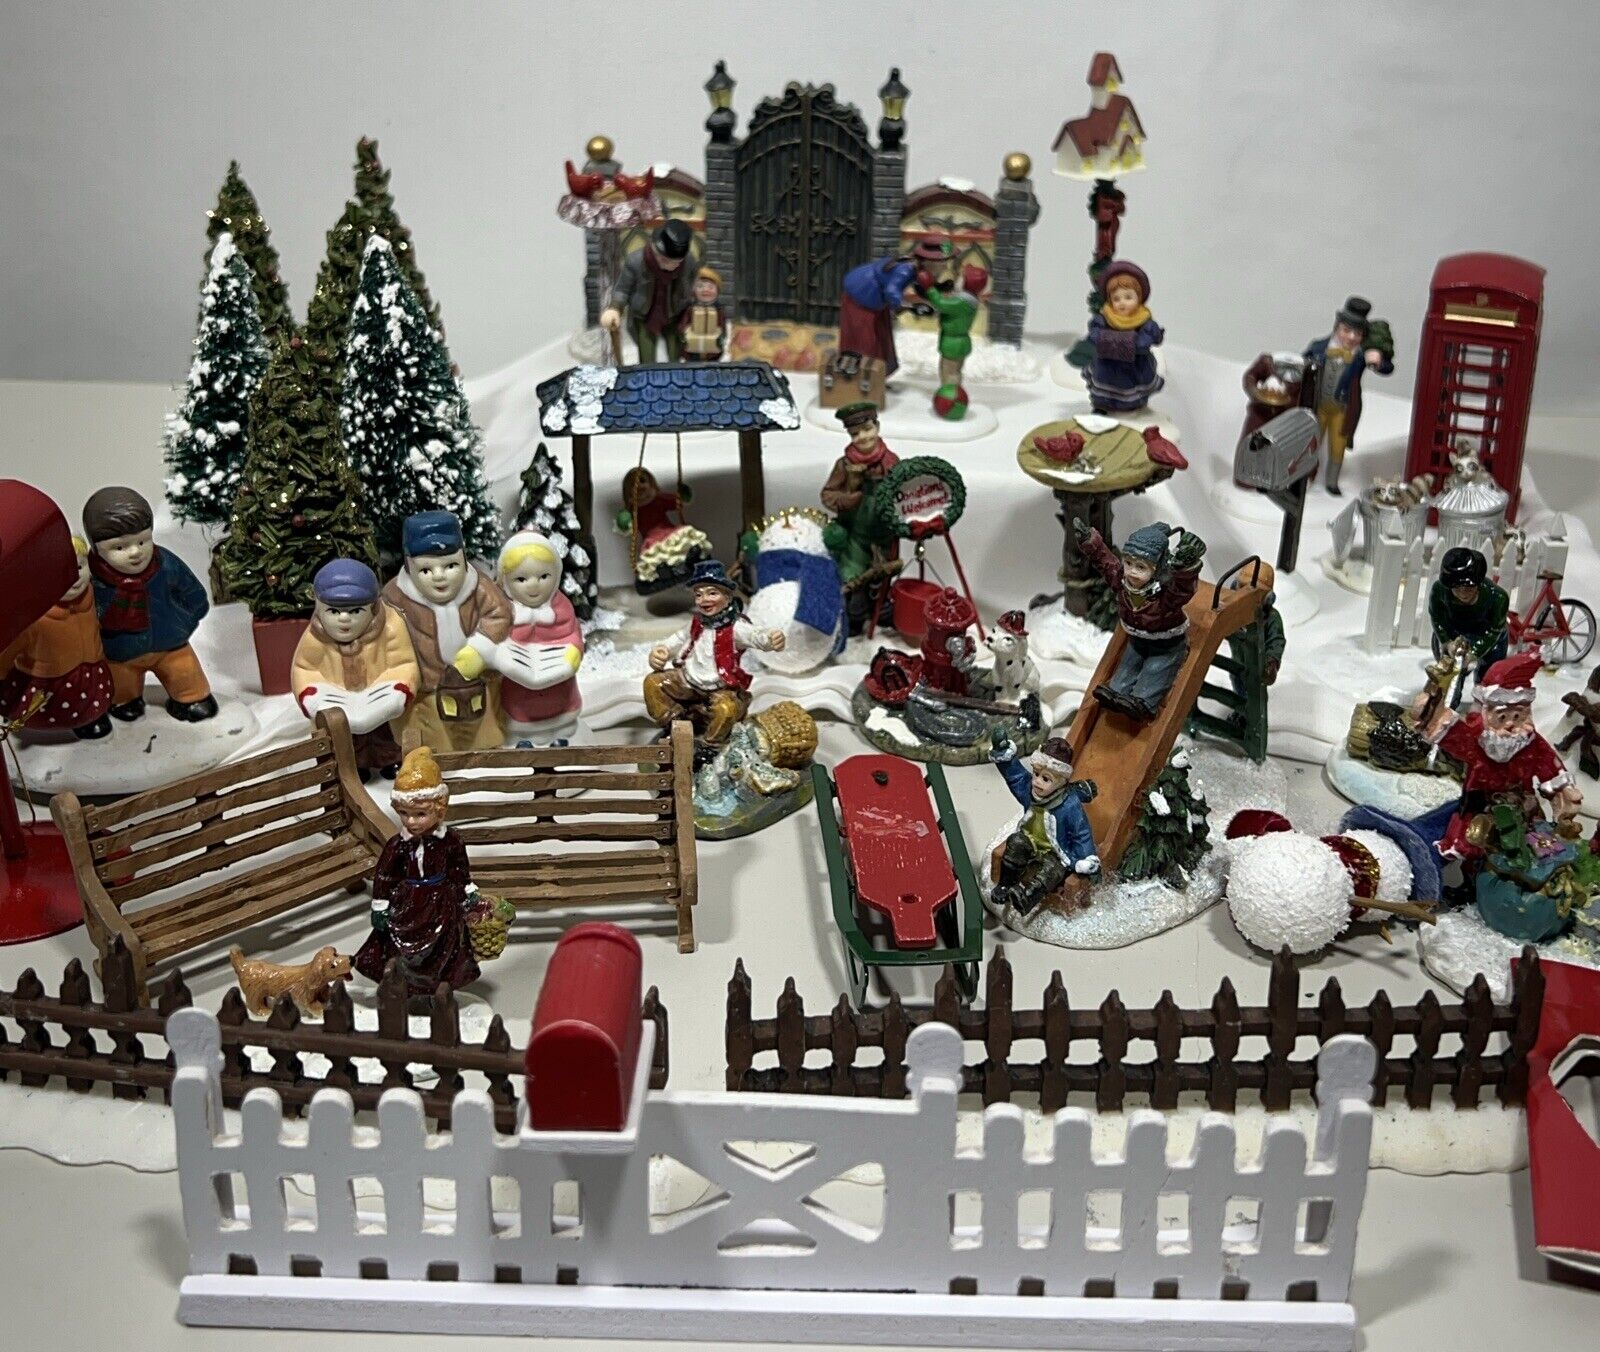 Lot of 46 Christmas Village People Mixed Brands Lemax O' Well Dept 56 Unbranded